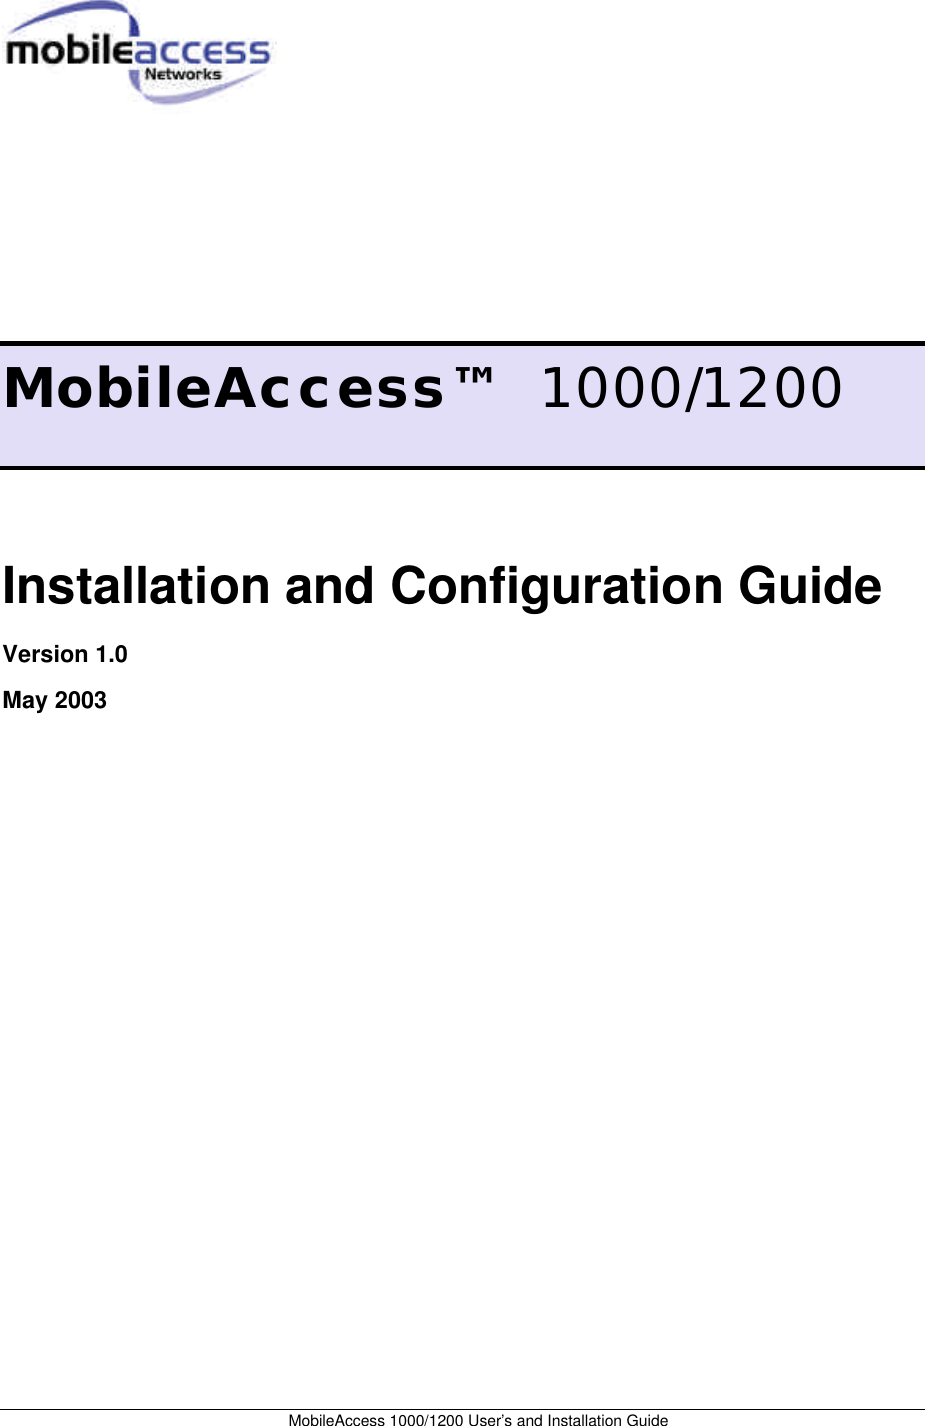  MobileAccess 1000/1200 User’s and Installation Guide          MobileAccess™   1000/1200  Installation and Configuration Guide Version 1.0 May 2003  